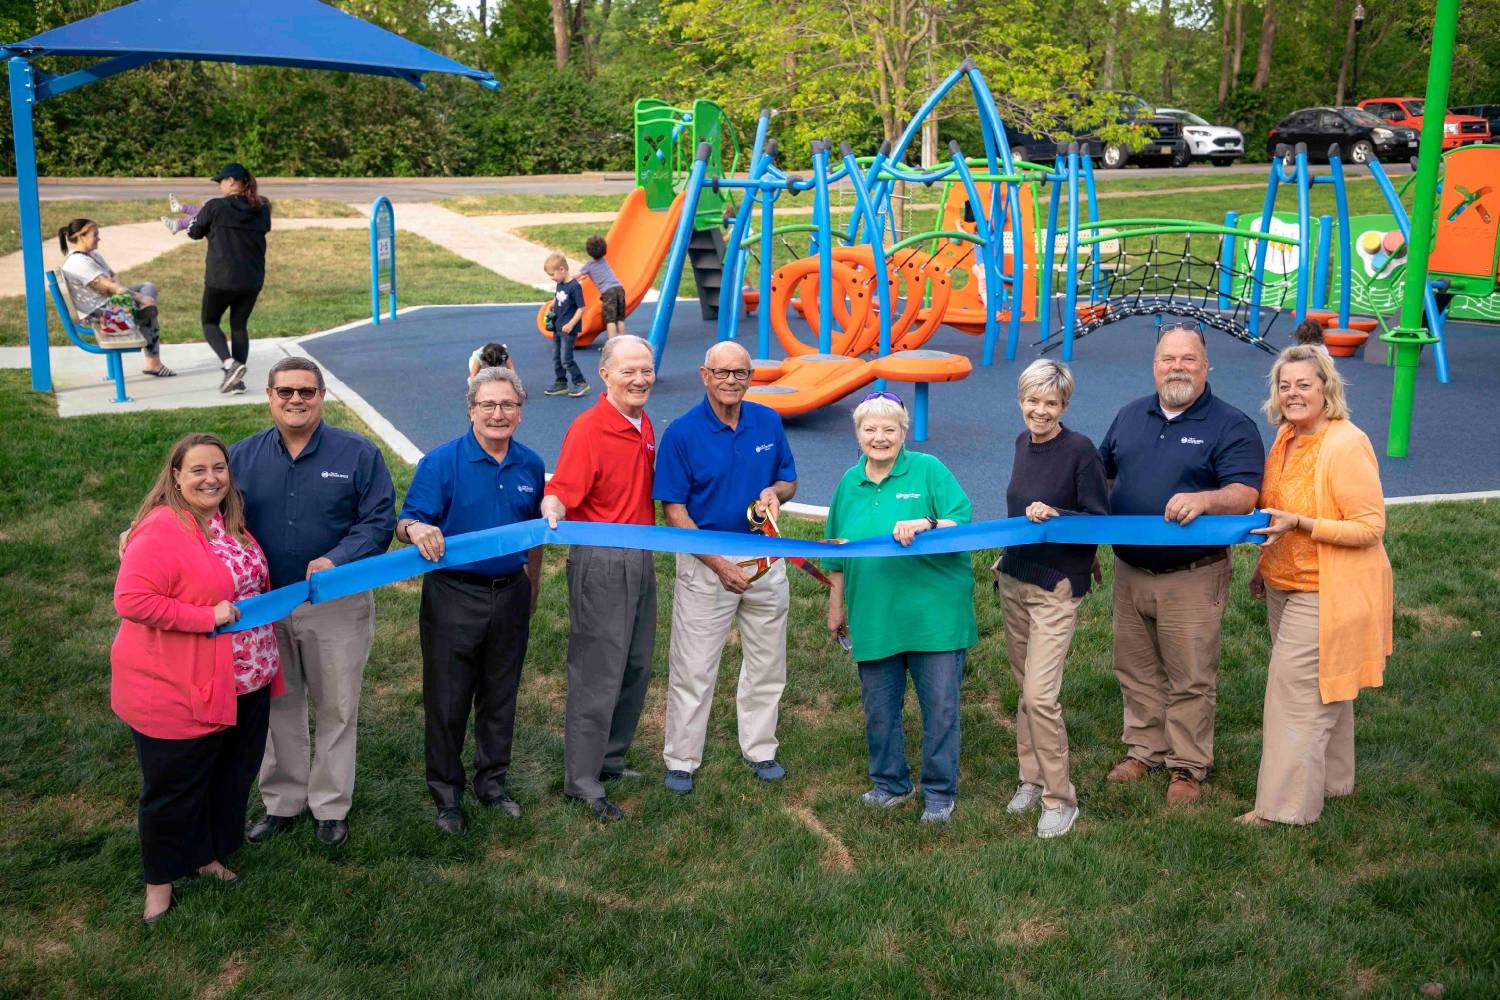 The Mayor, City Administrator, Director of Parks and Recreation, and Members of the Maryland Heights City Council pose with a ribbon and oversized pair of scissors at an playground located in Parkwood Park. Behind them, various children play on the playground equipment.